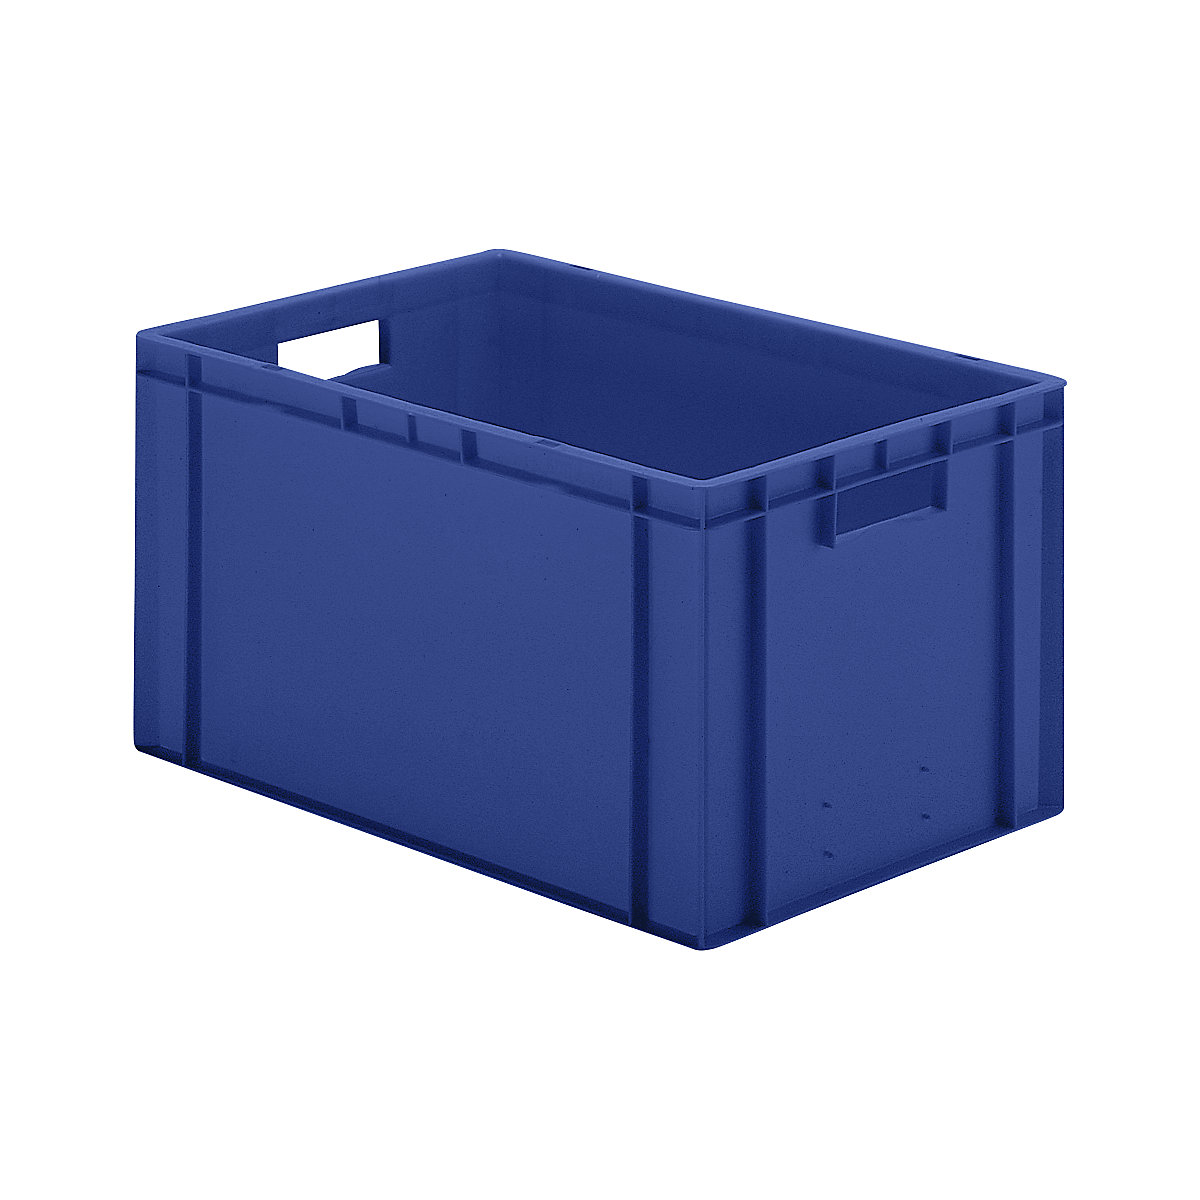 Euro stacking container, closed walls and base, LxWxH 600 x 400 x 320 mm, blue, pack of 5